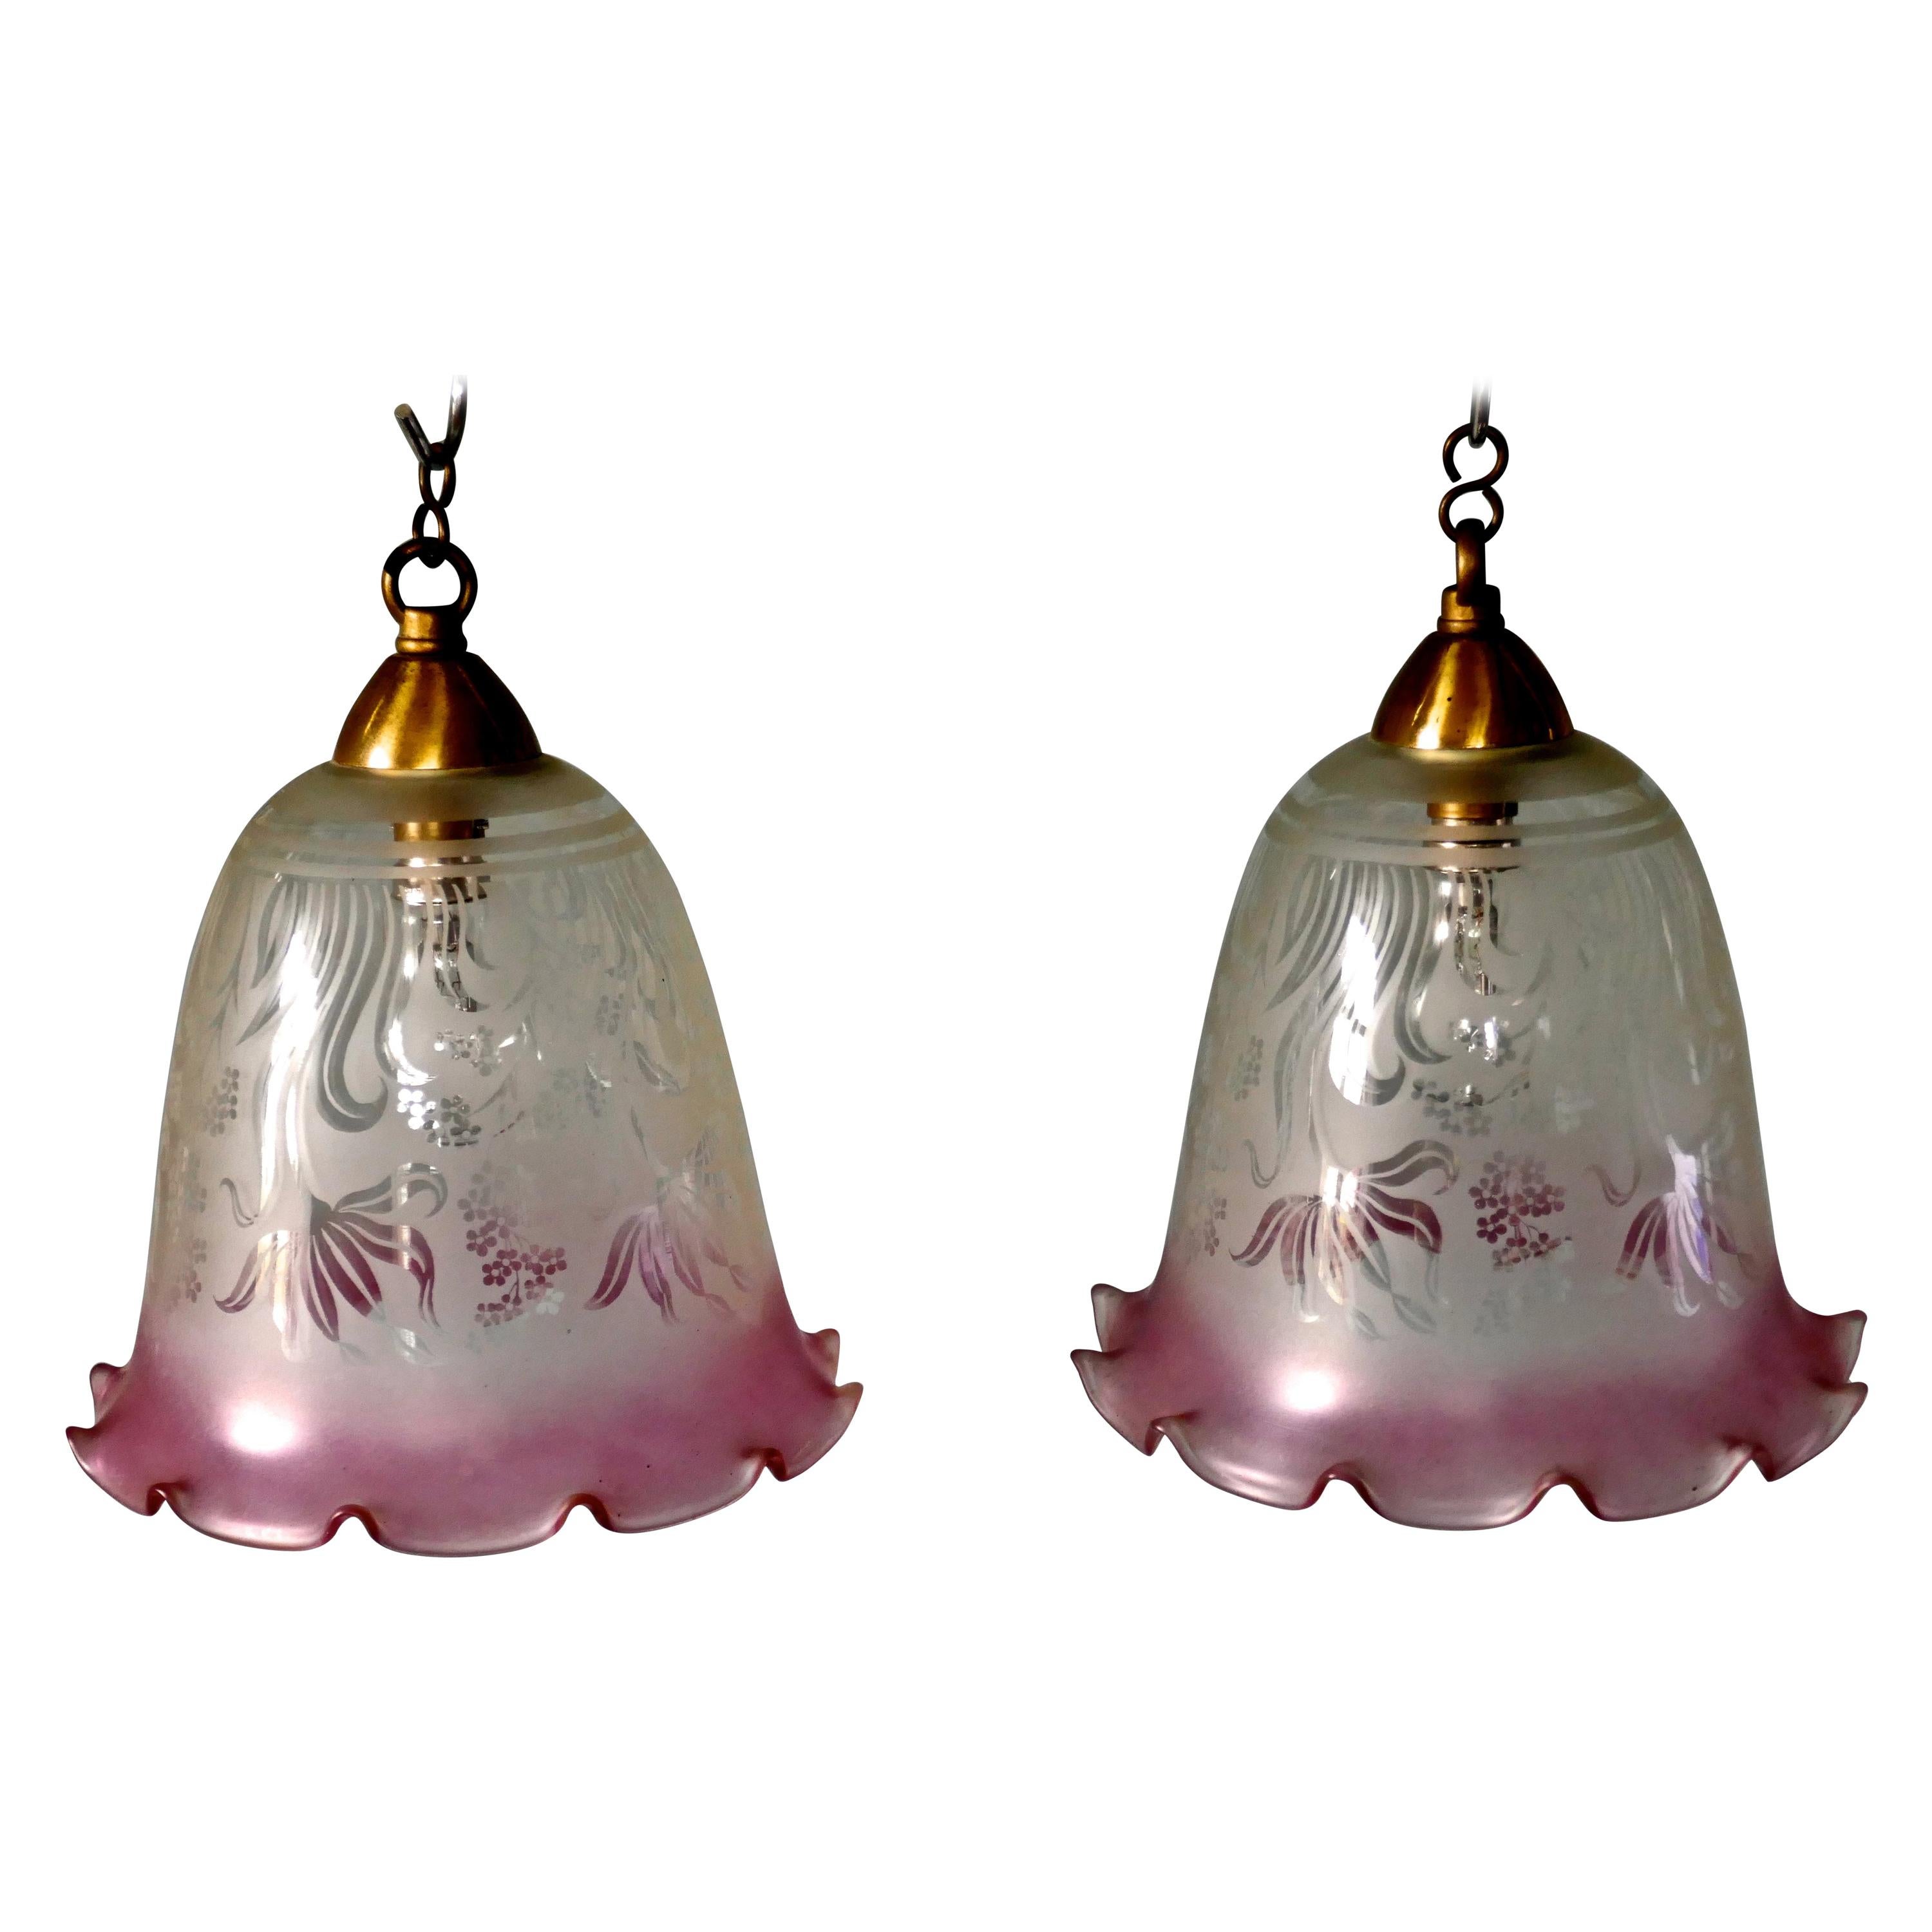 Pair of Large Glass Ceiling Lights Etched, Pink and Clear Pendant Lampshades